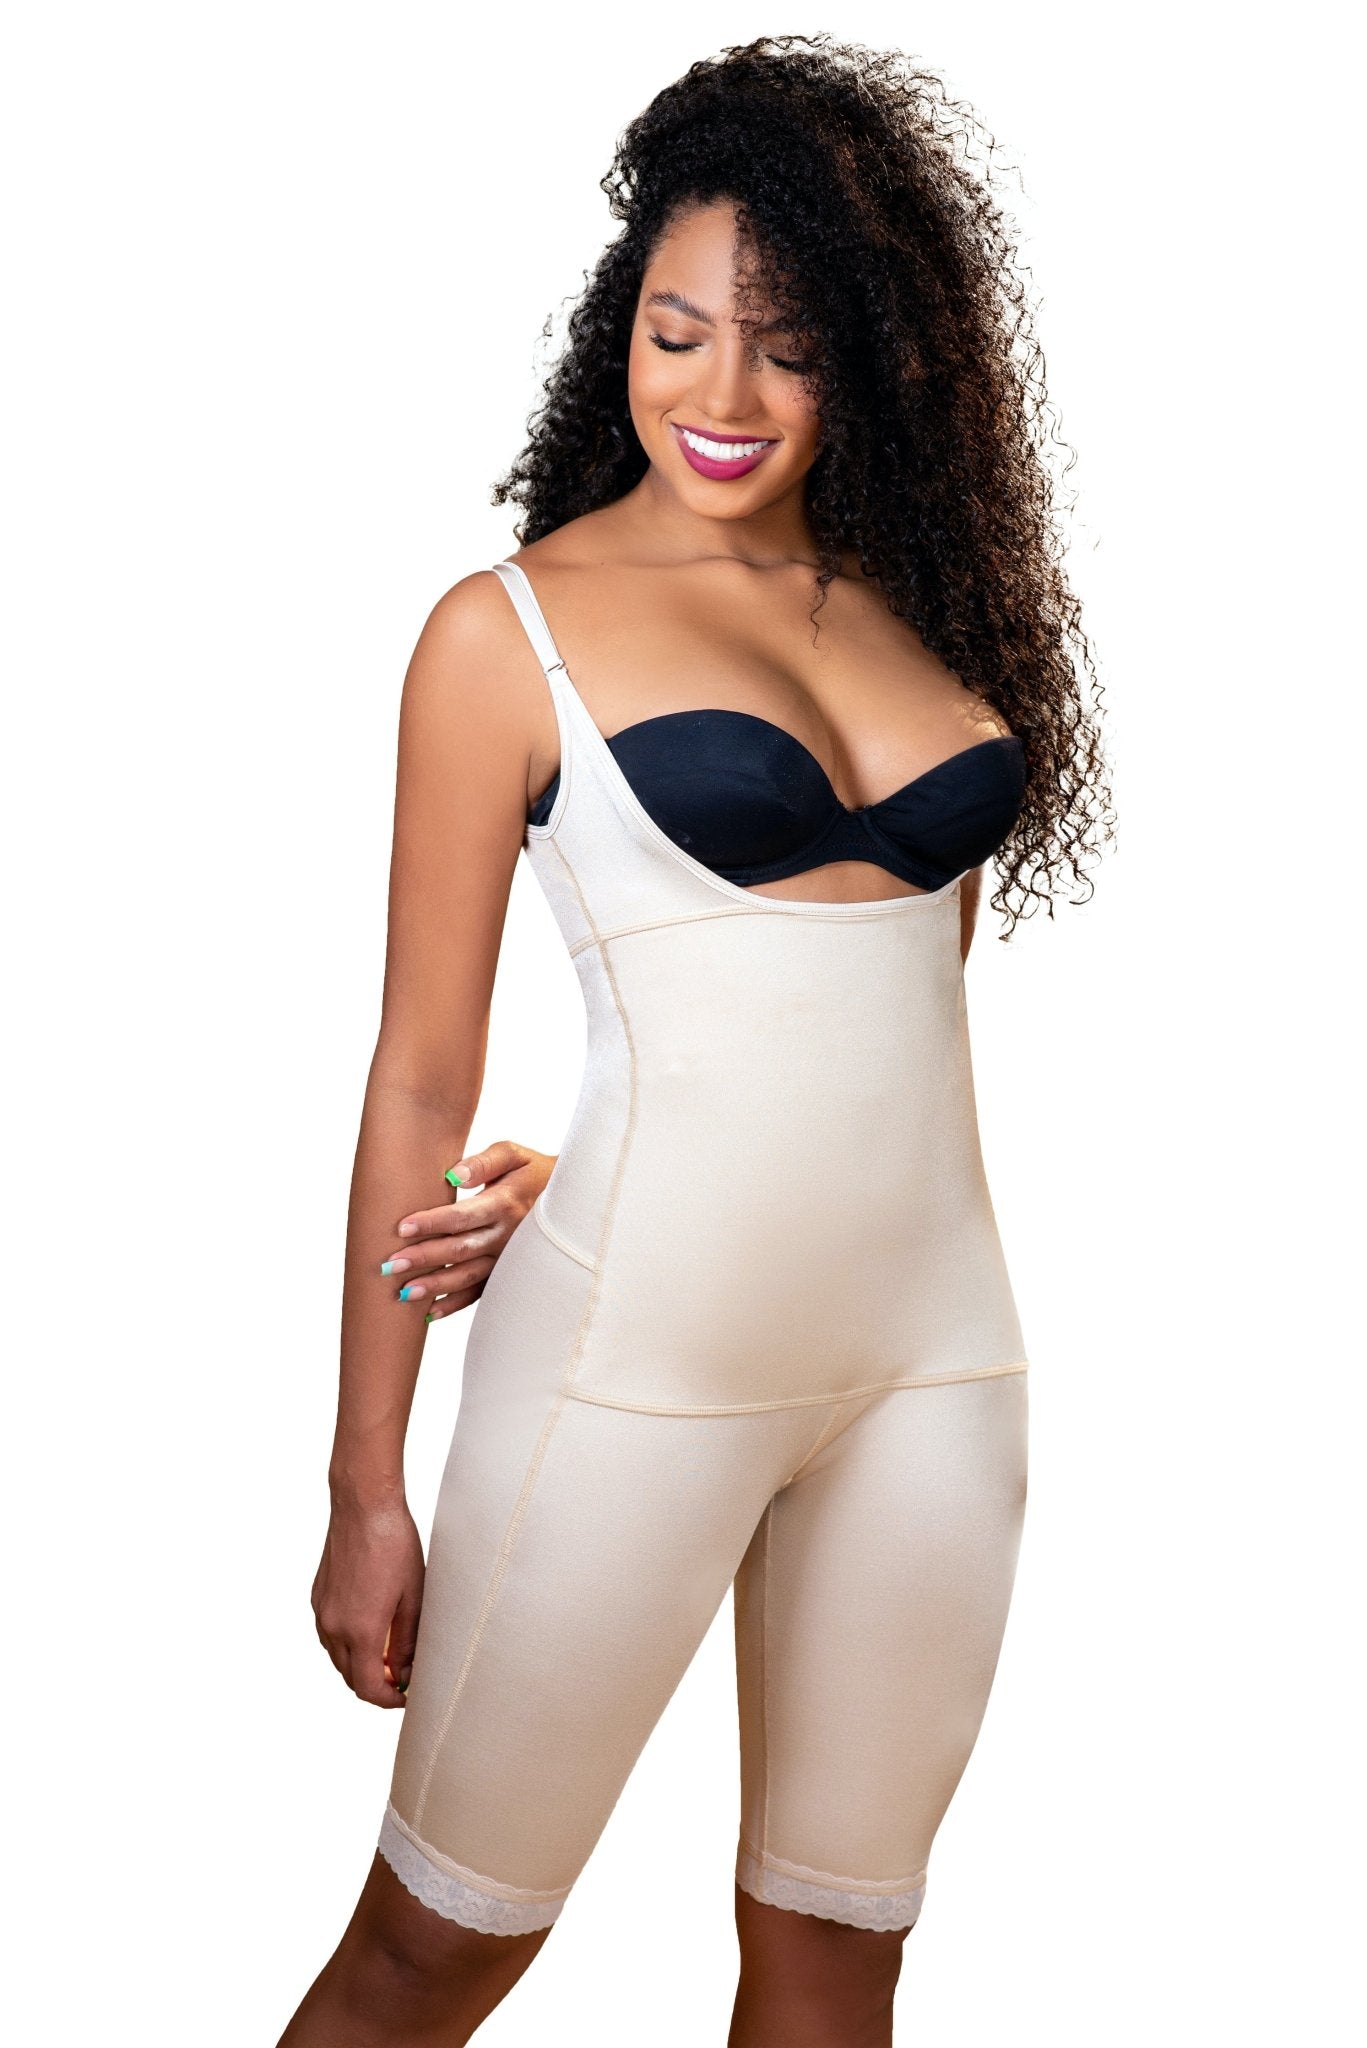 Women's Strong Tummy Control Shapewear Bodysuit with France